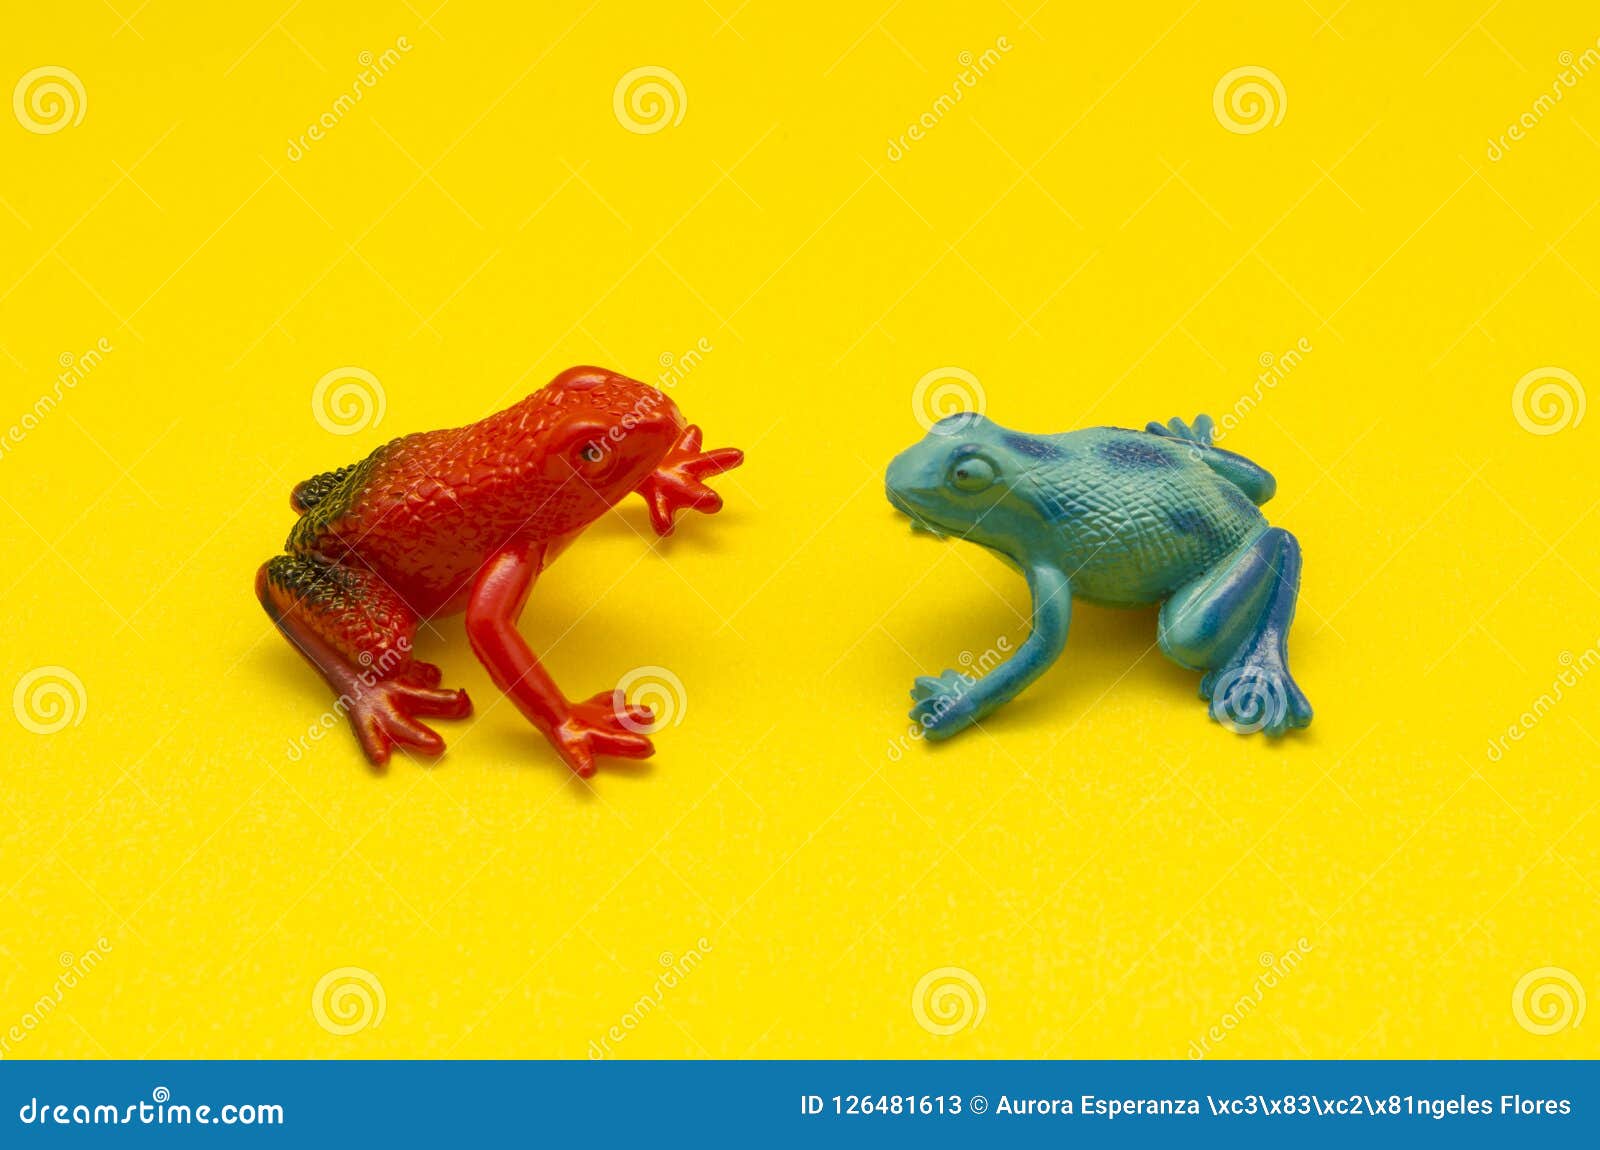 Plastic Toy Frogs on Yellow Background Stock Image - Image of color,  plastic: 126481613